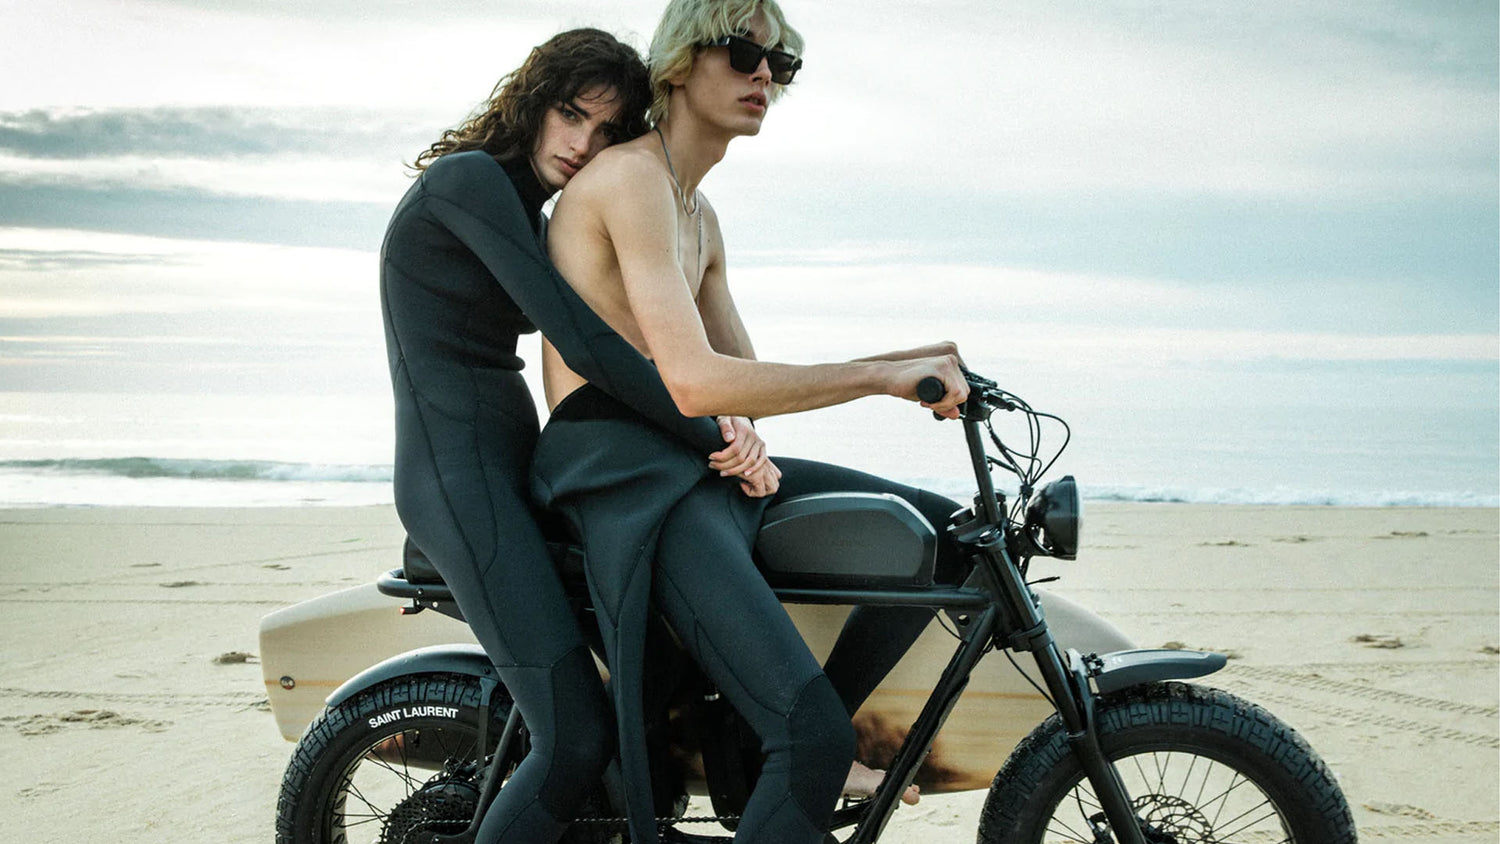 Two models riding super73 on a beach